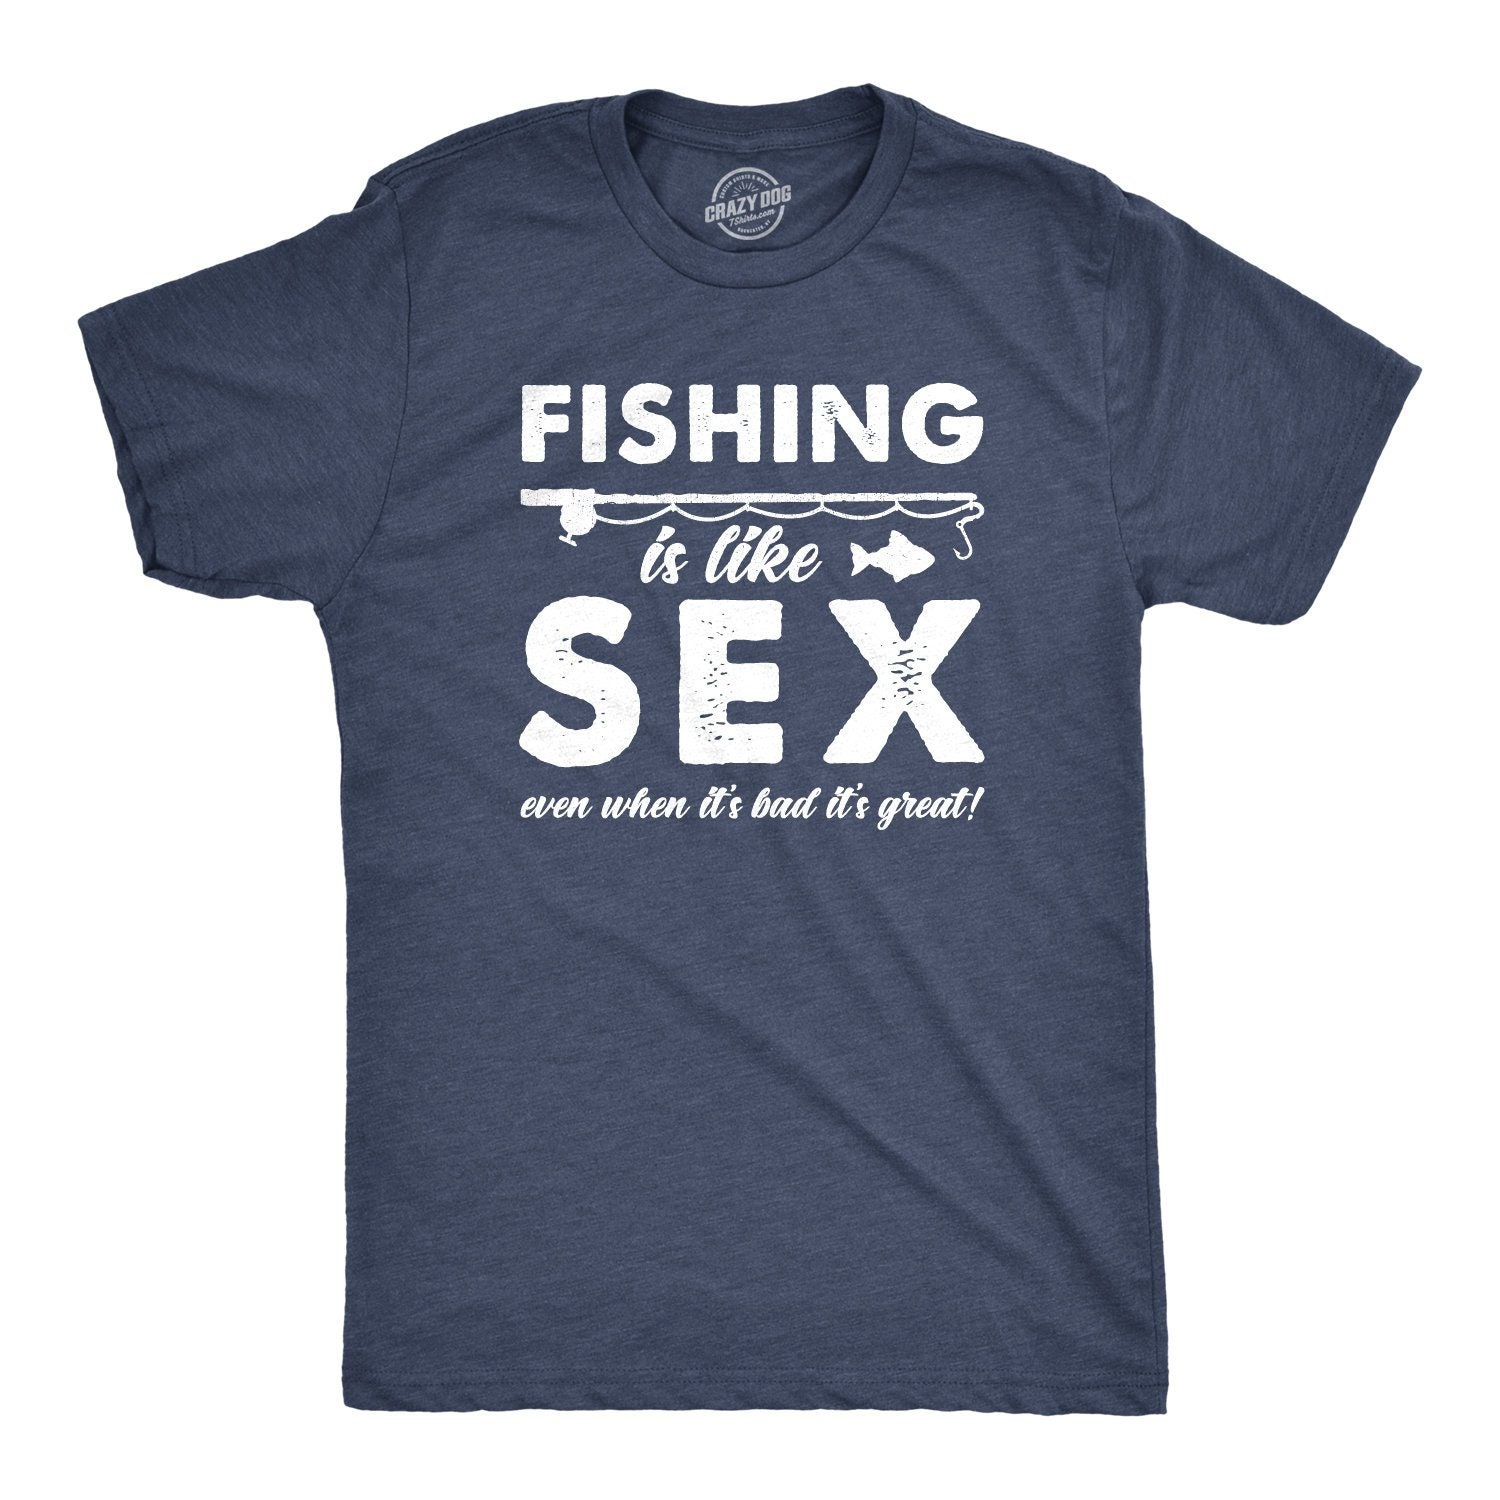 Sarcastic Fishing Sex T Shirt Men, Offensive Tshirt for Fisherman, Rude  Sassy Anglers Tees, Funny Mens Quotes Shirts, Guys Joke Quote Tops 